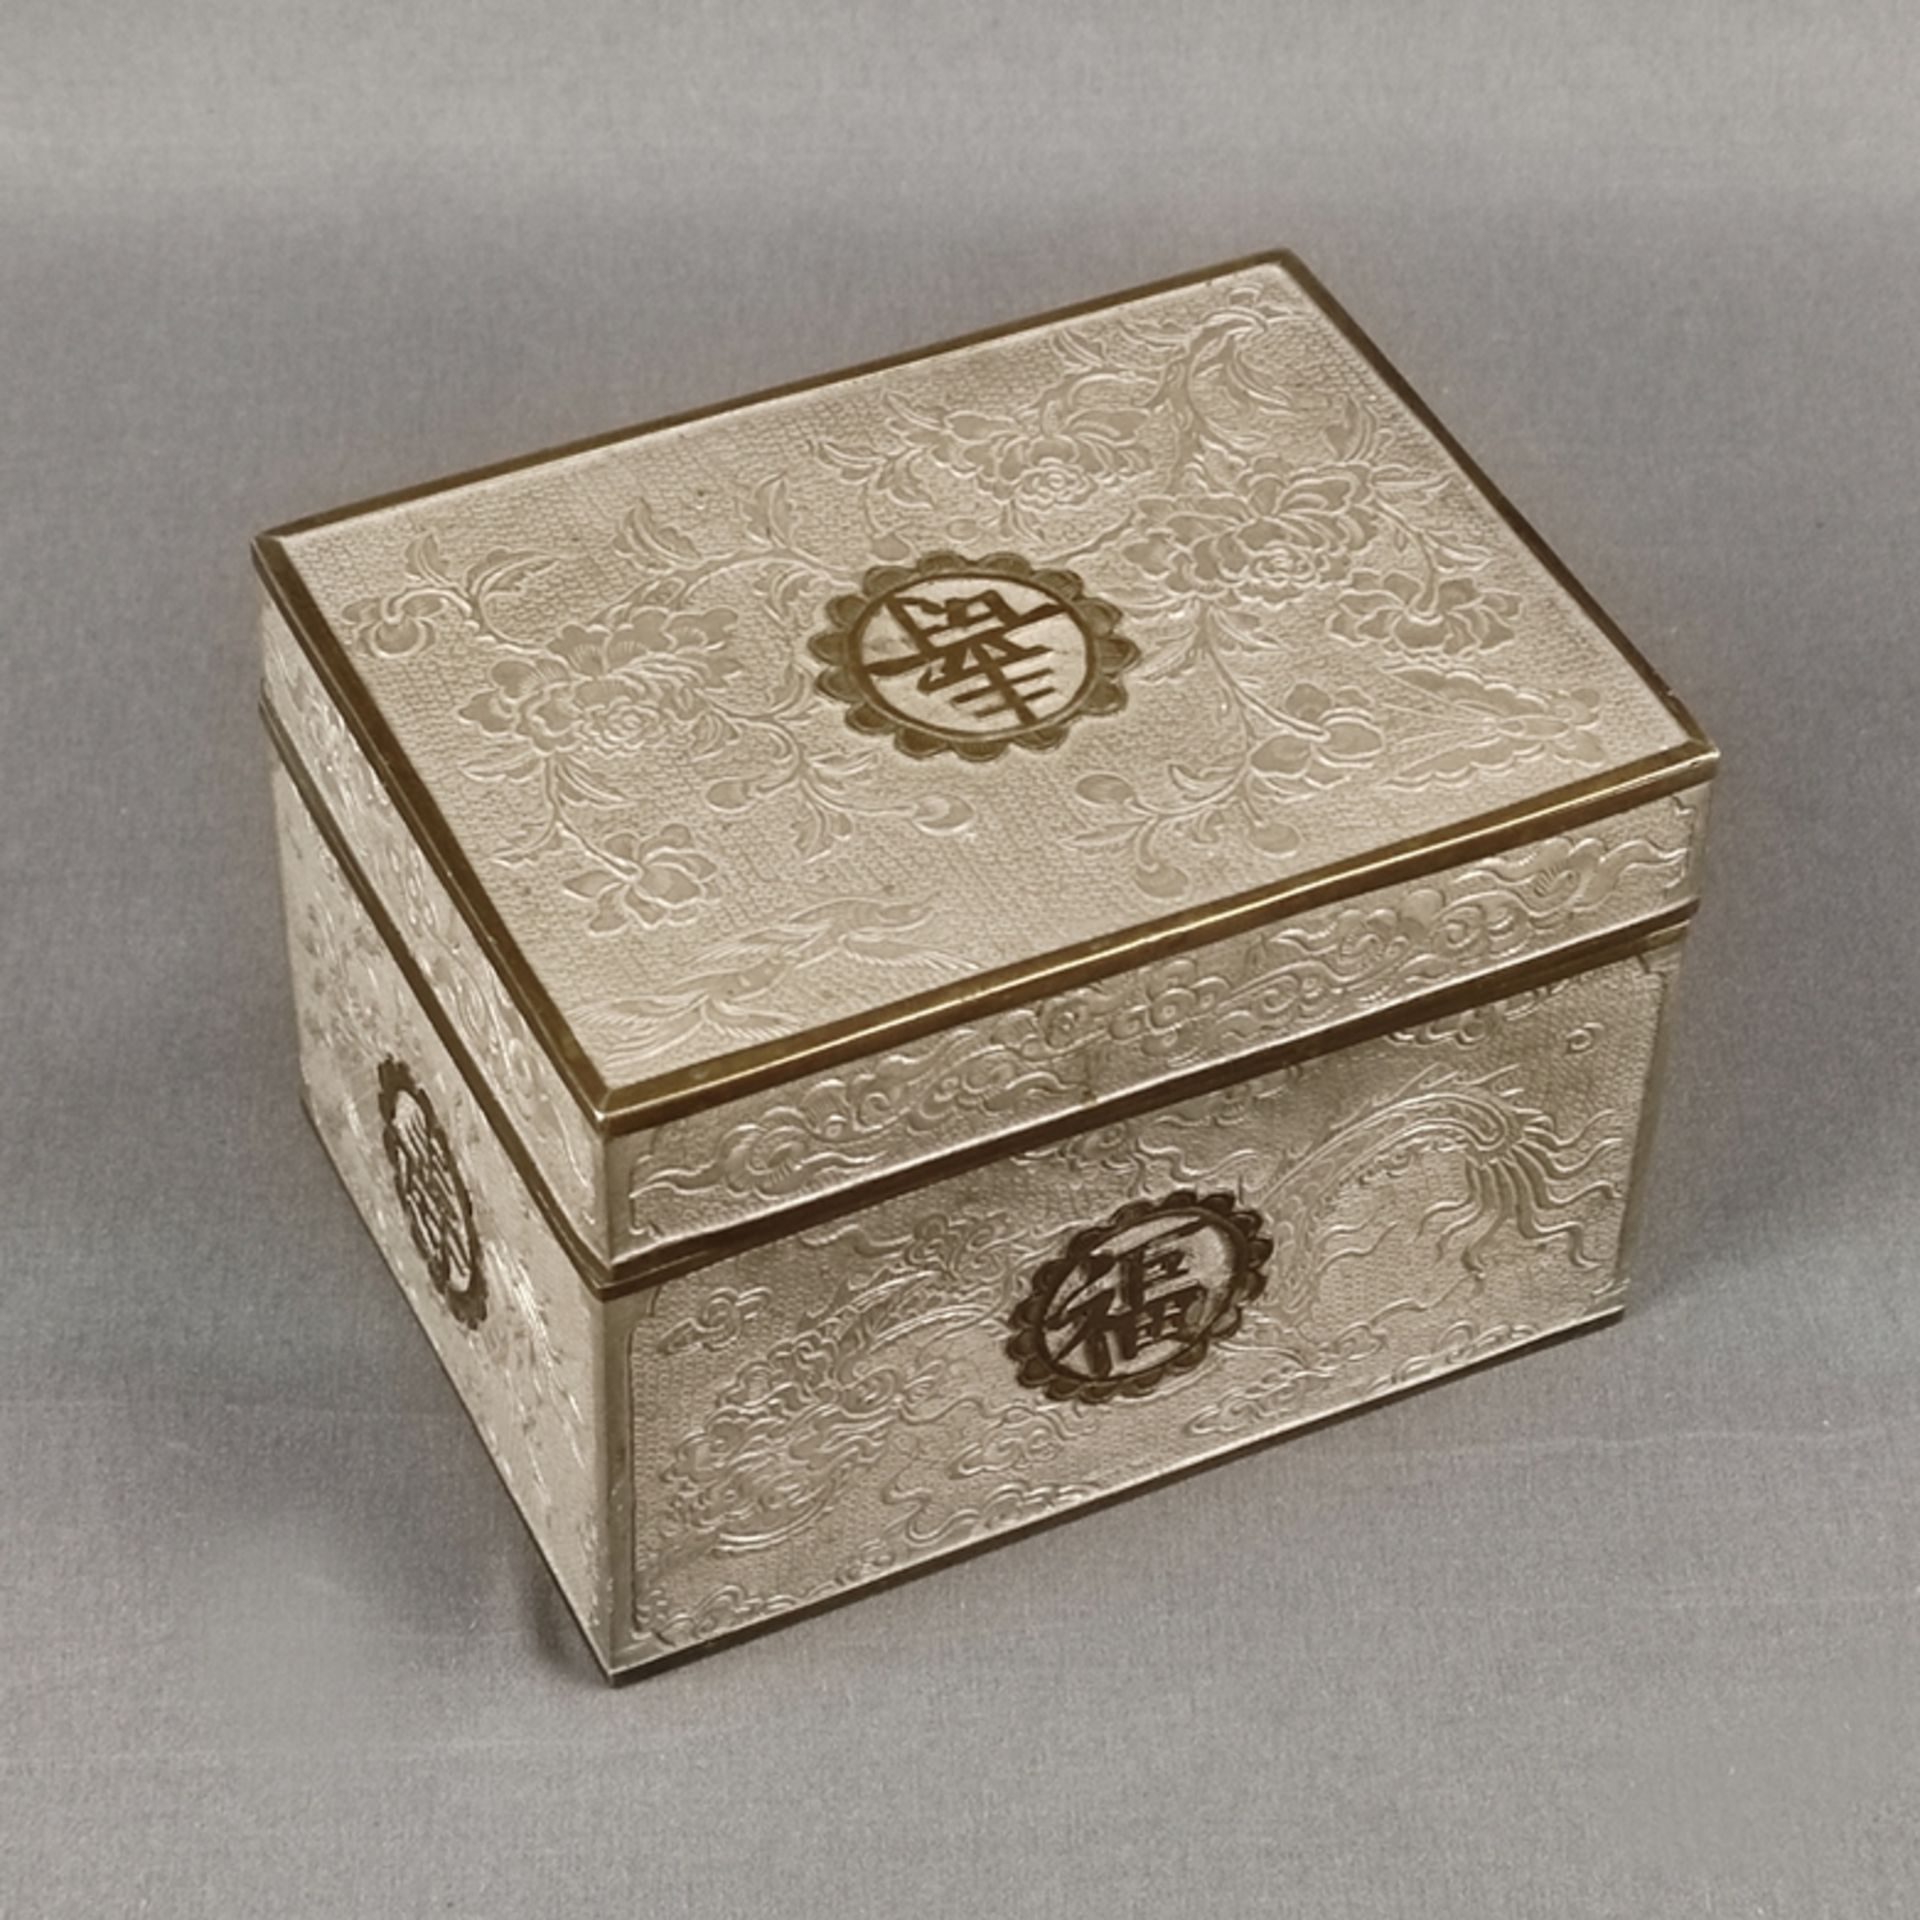 Tea caddy, China, pewter, relief decoration with floral motives and dragons, on each side writing c